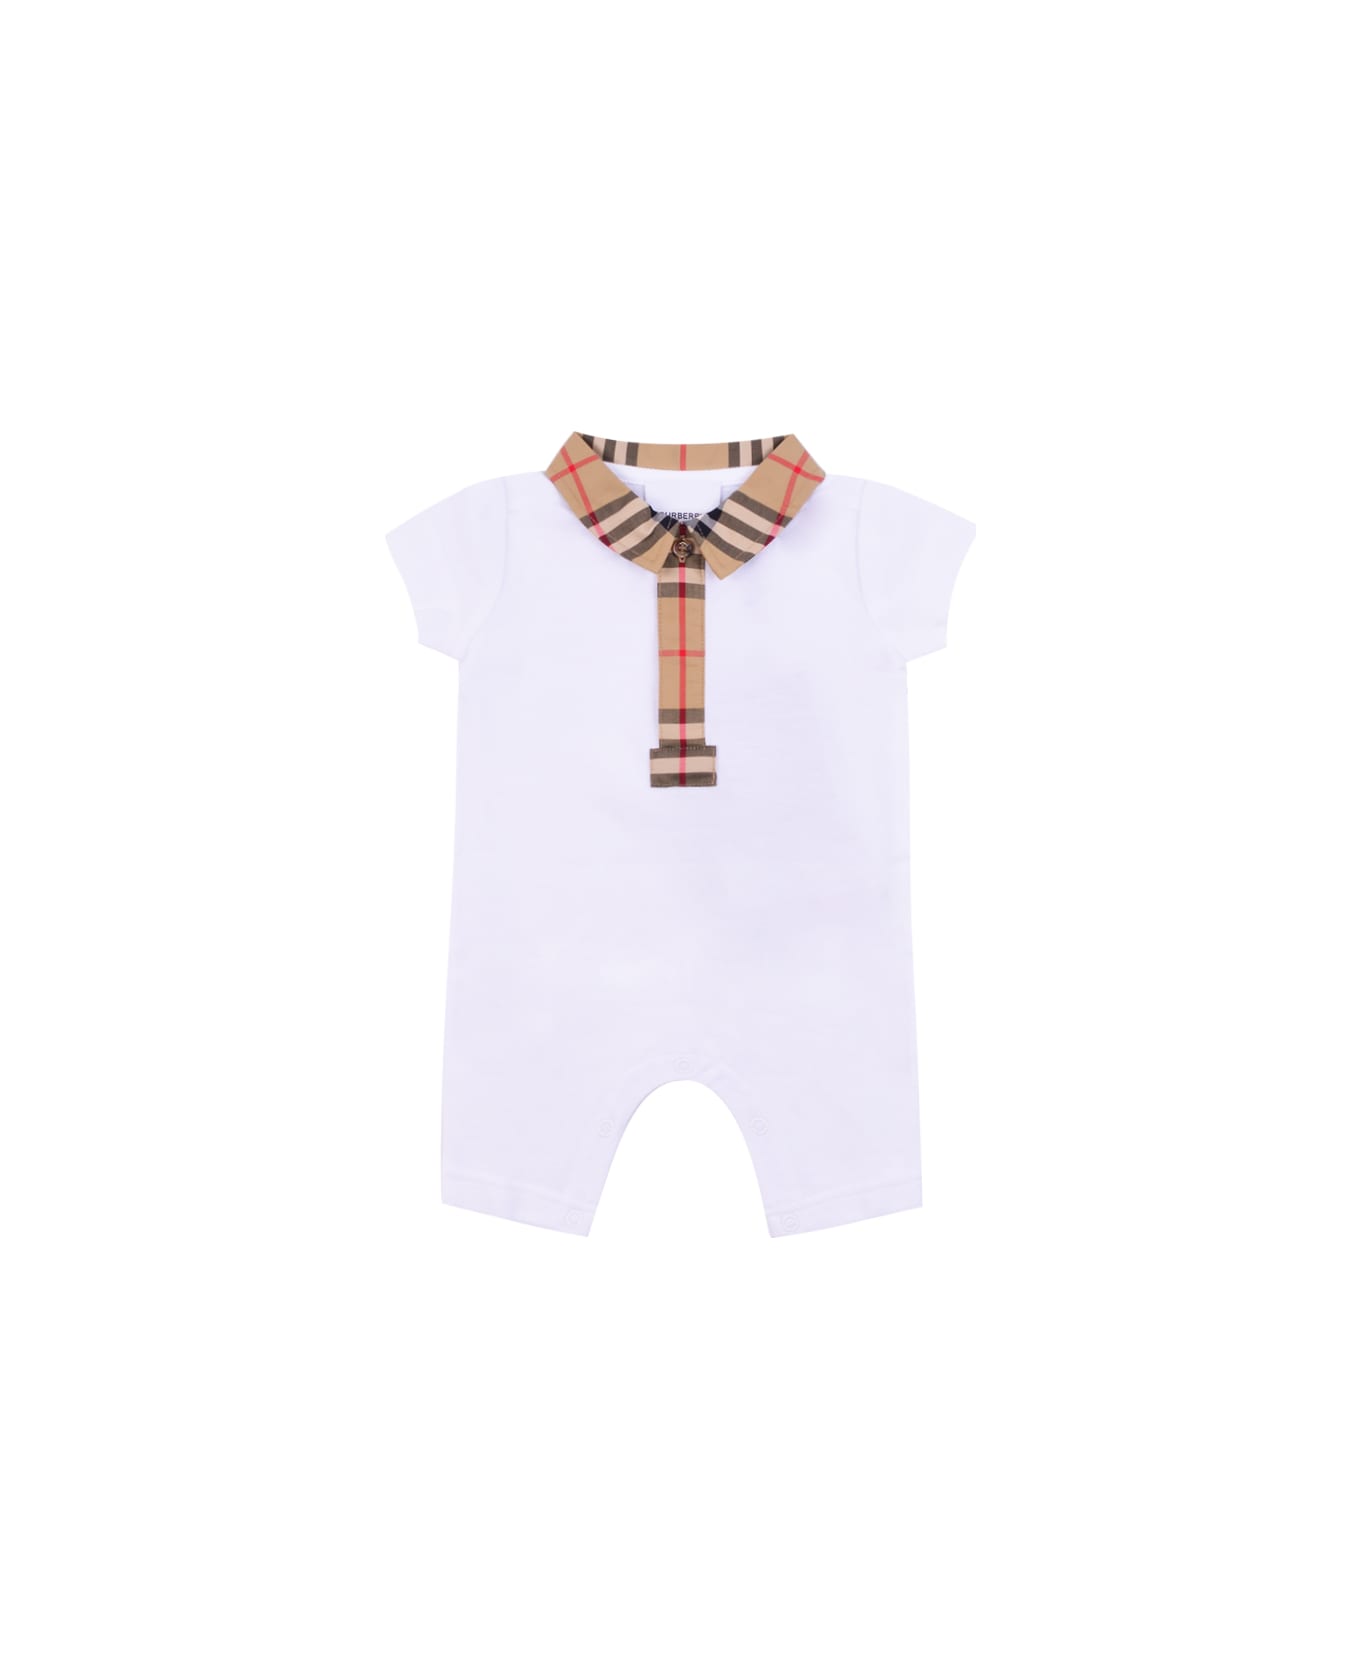 Burberry Romper In Cotton Piqué With Tartan Finishes - White